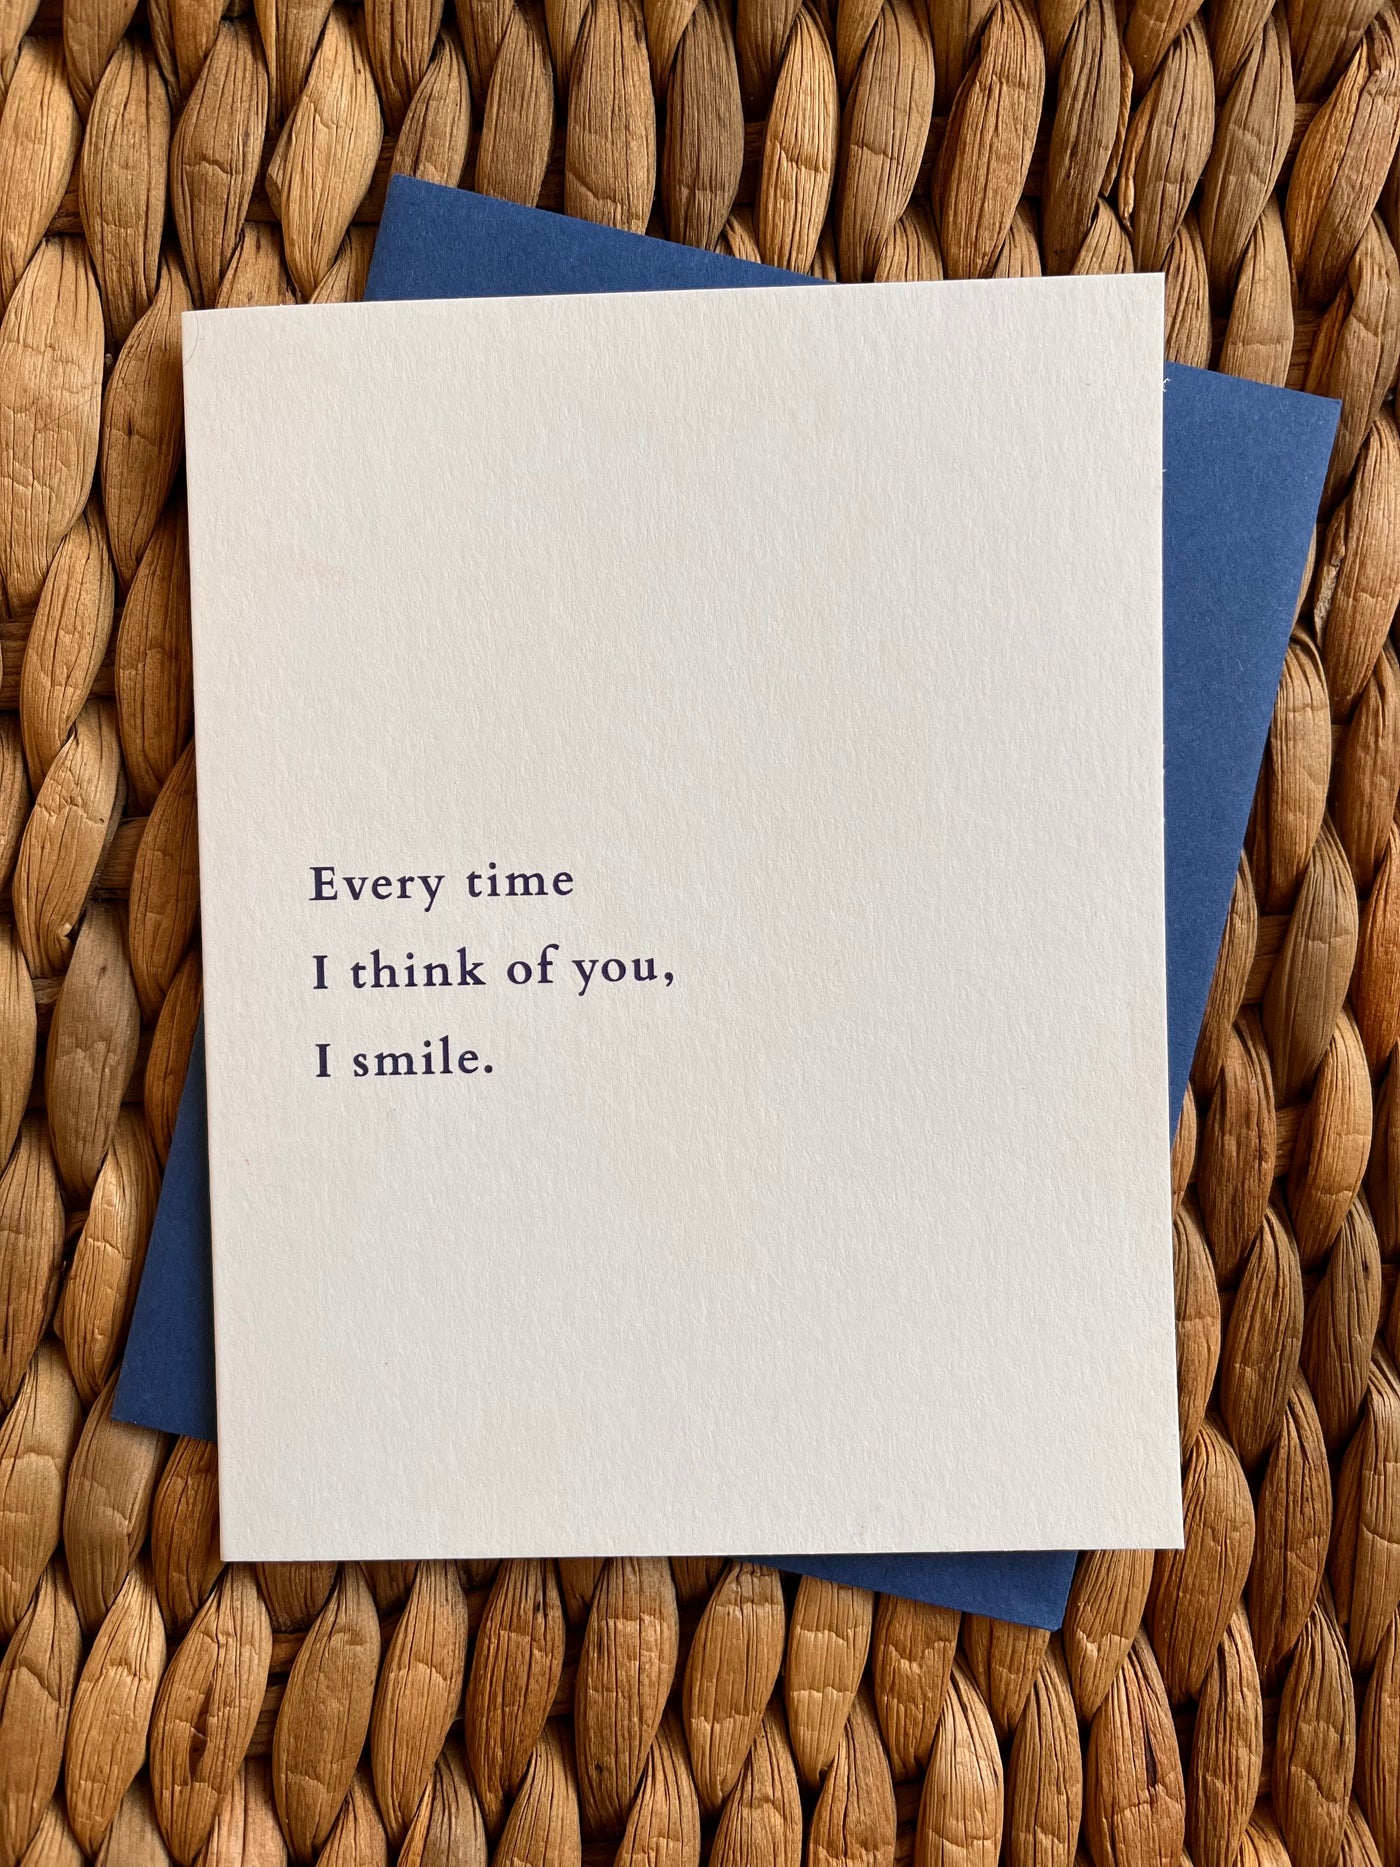 Beknown greeting card with envelope on wood in collaboration with House of Pride, inspired by words from Char Bailey, Every time I think of you, I smile.